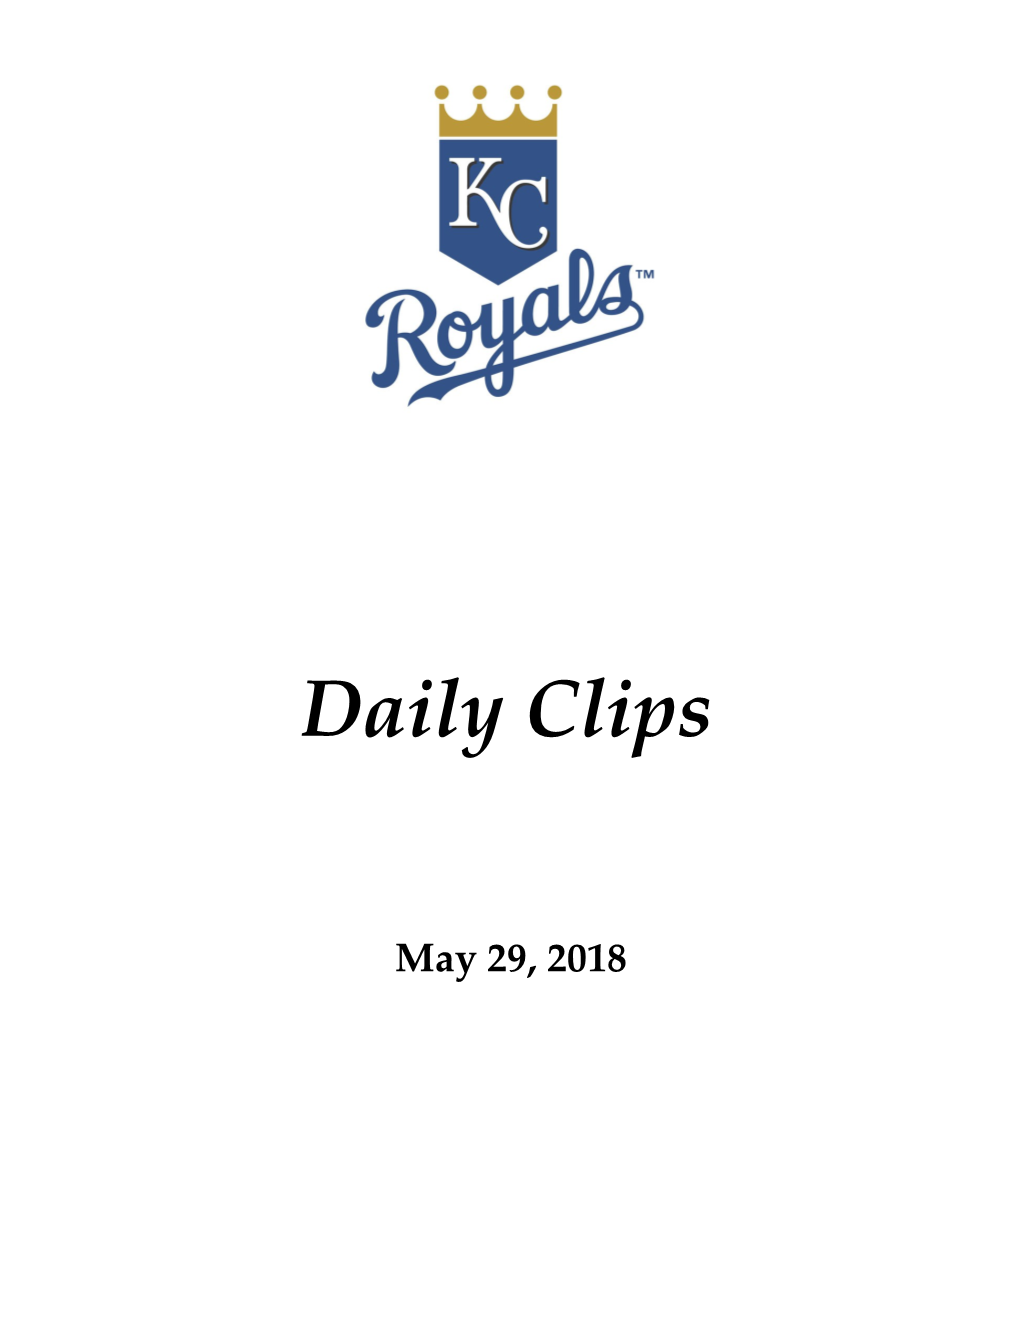 Missed Opportunities Come Back to Haunt Royals